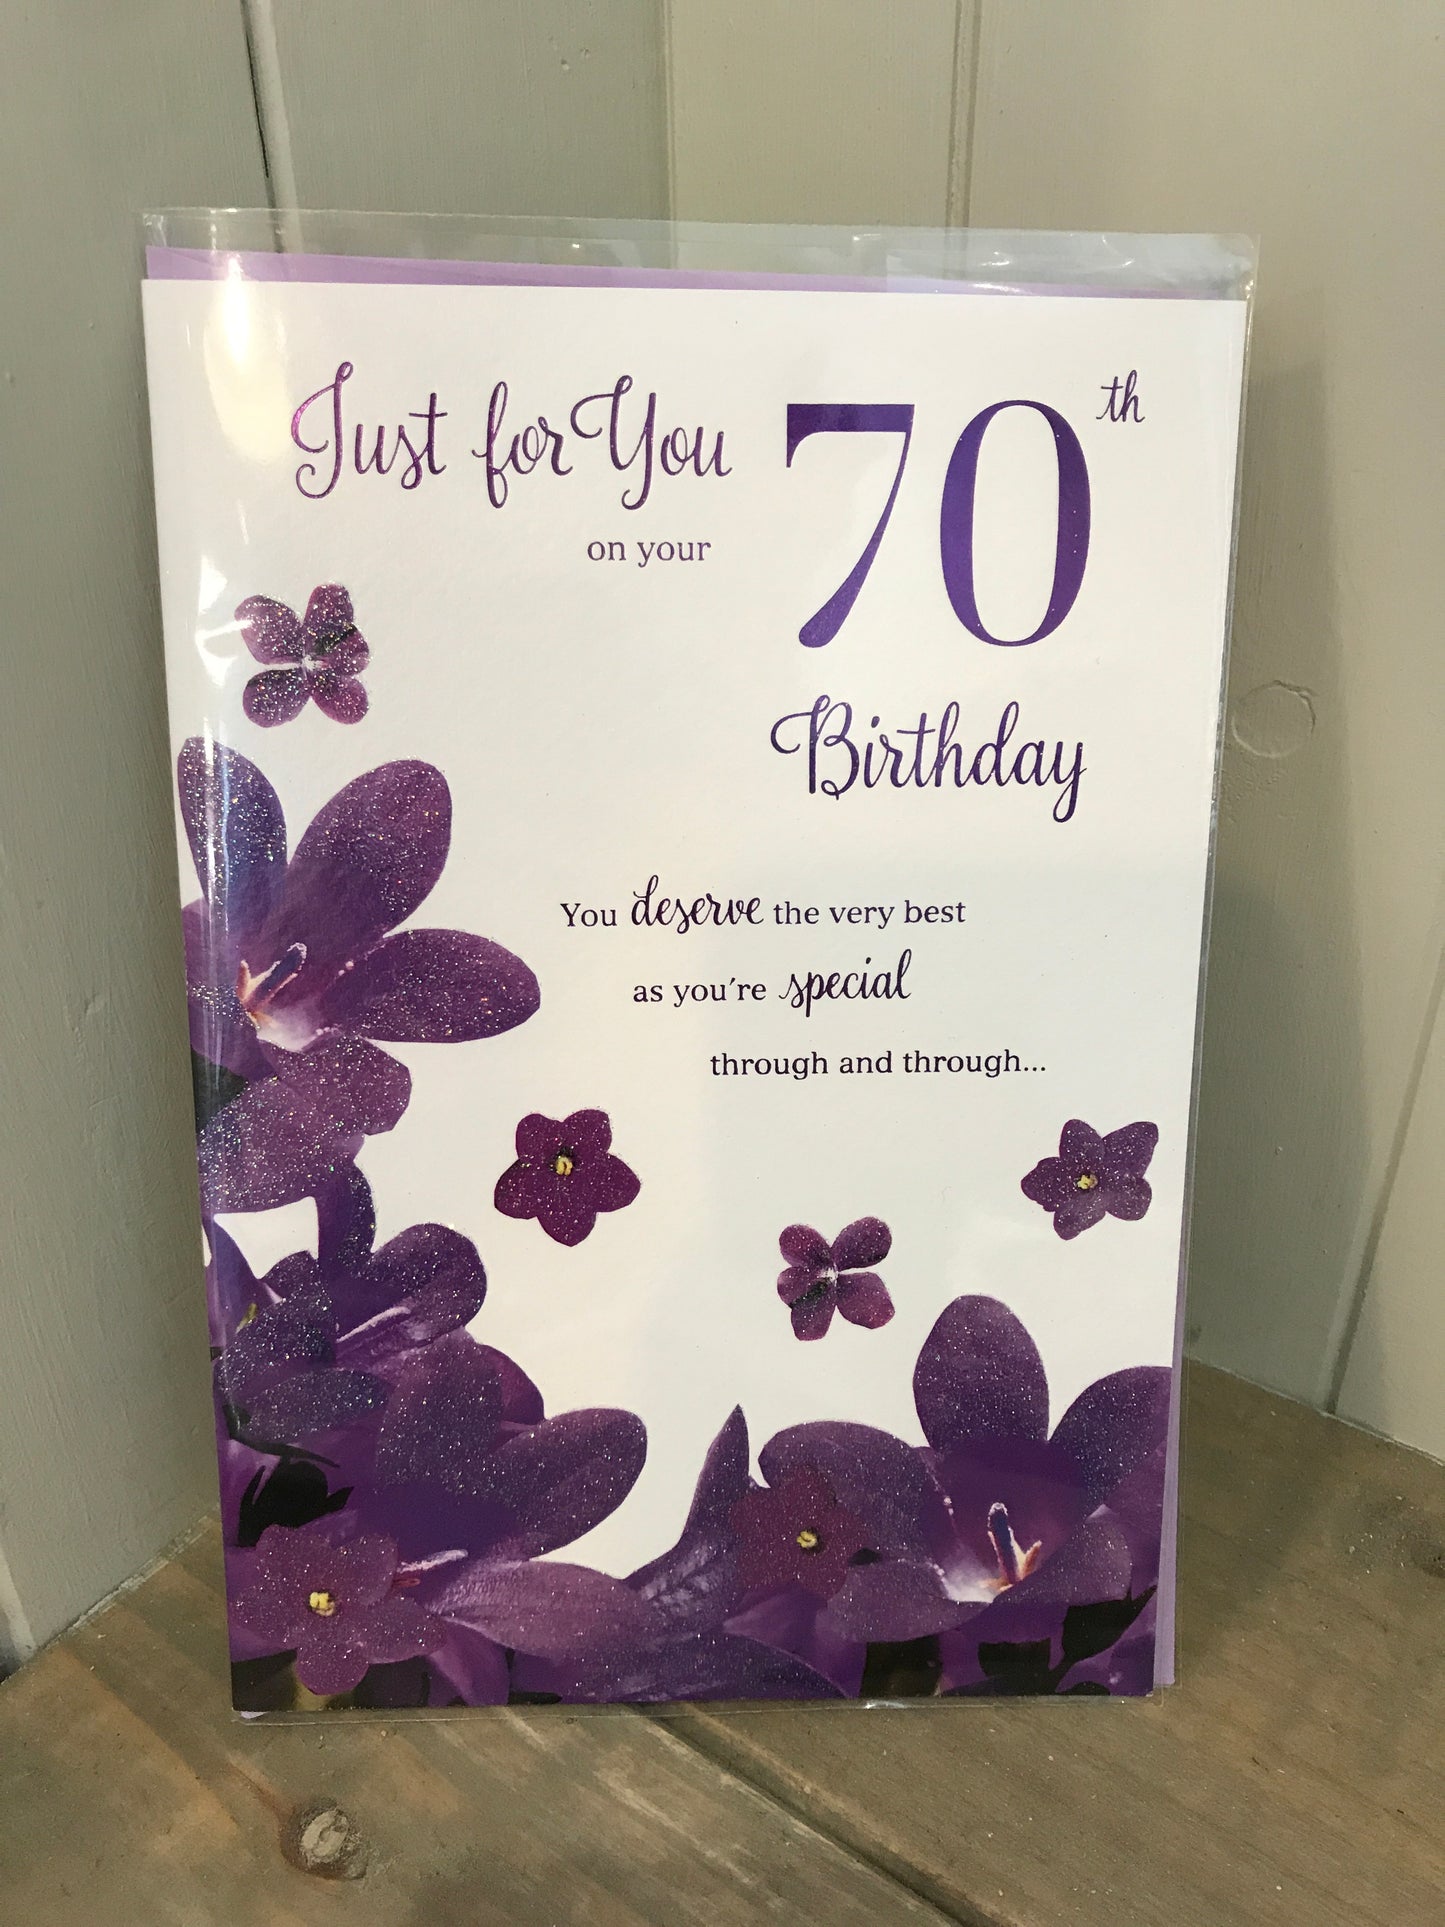 Just for you on your 70th Birthday Card (5499983397024)